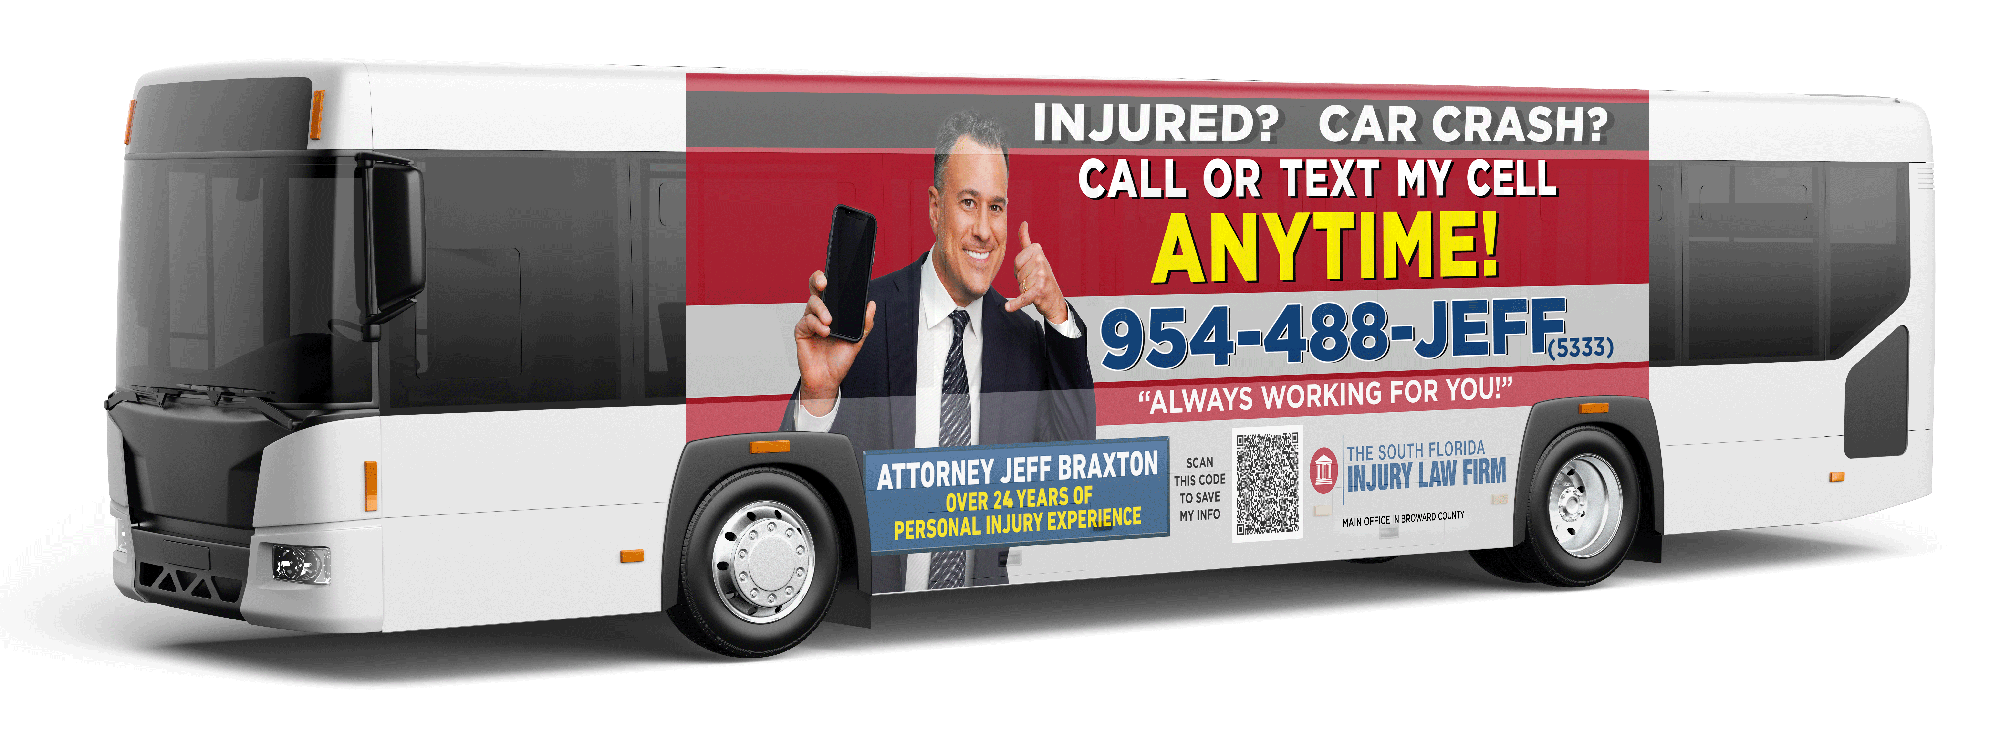 south florida injury law firm bus